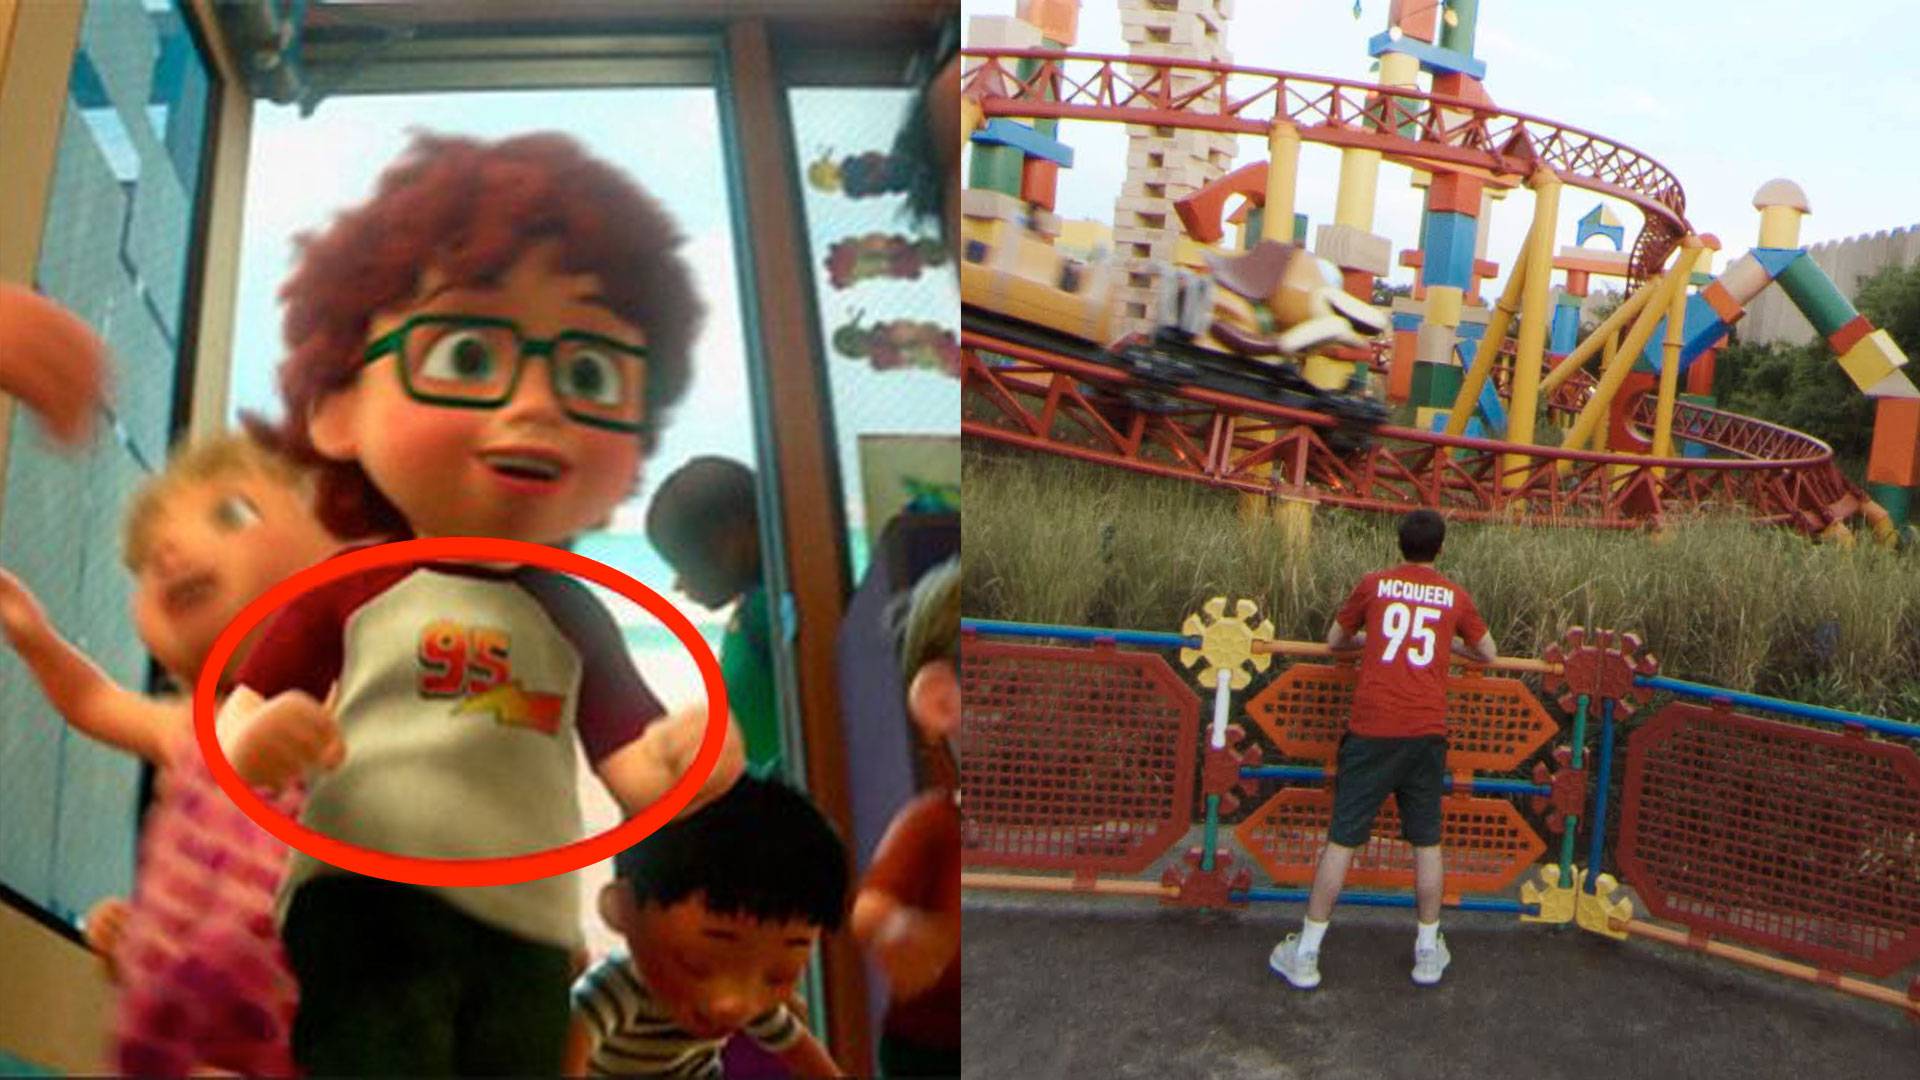 A sports jersey bearing the name “McQueen” and the number “95”, in reference to Lightning McQueen, protagonist from the Cars franchise.